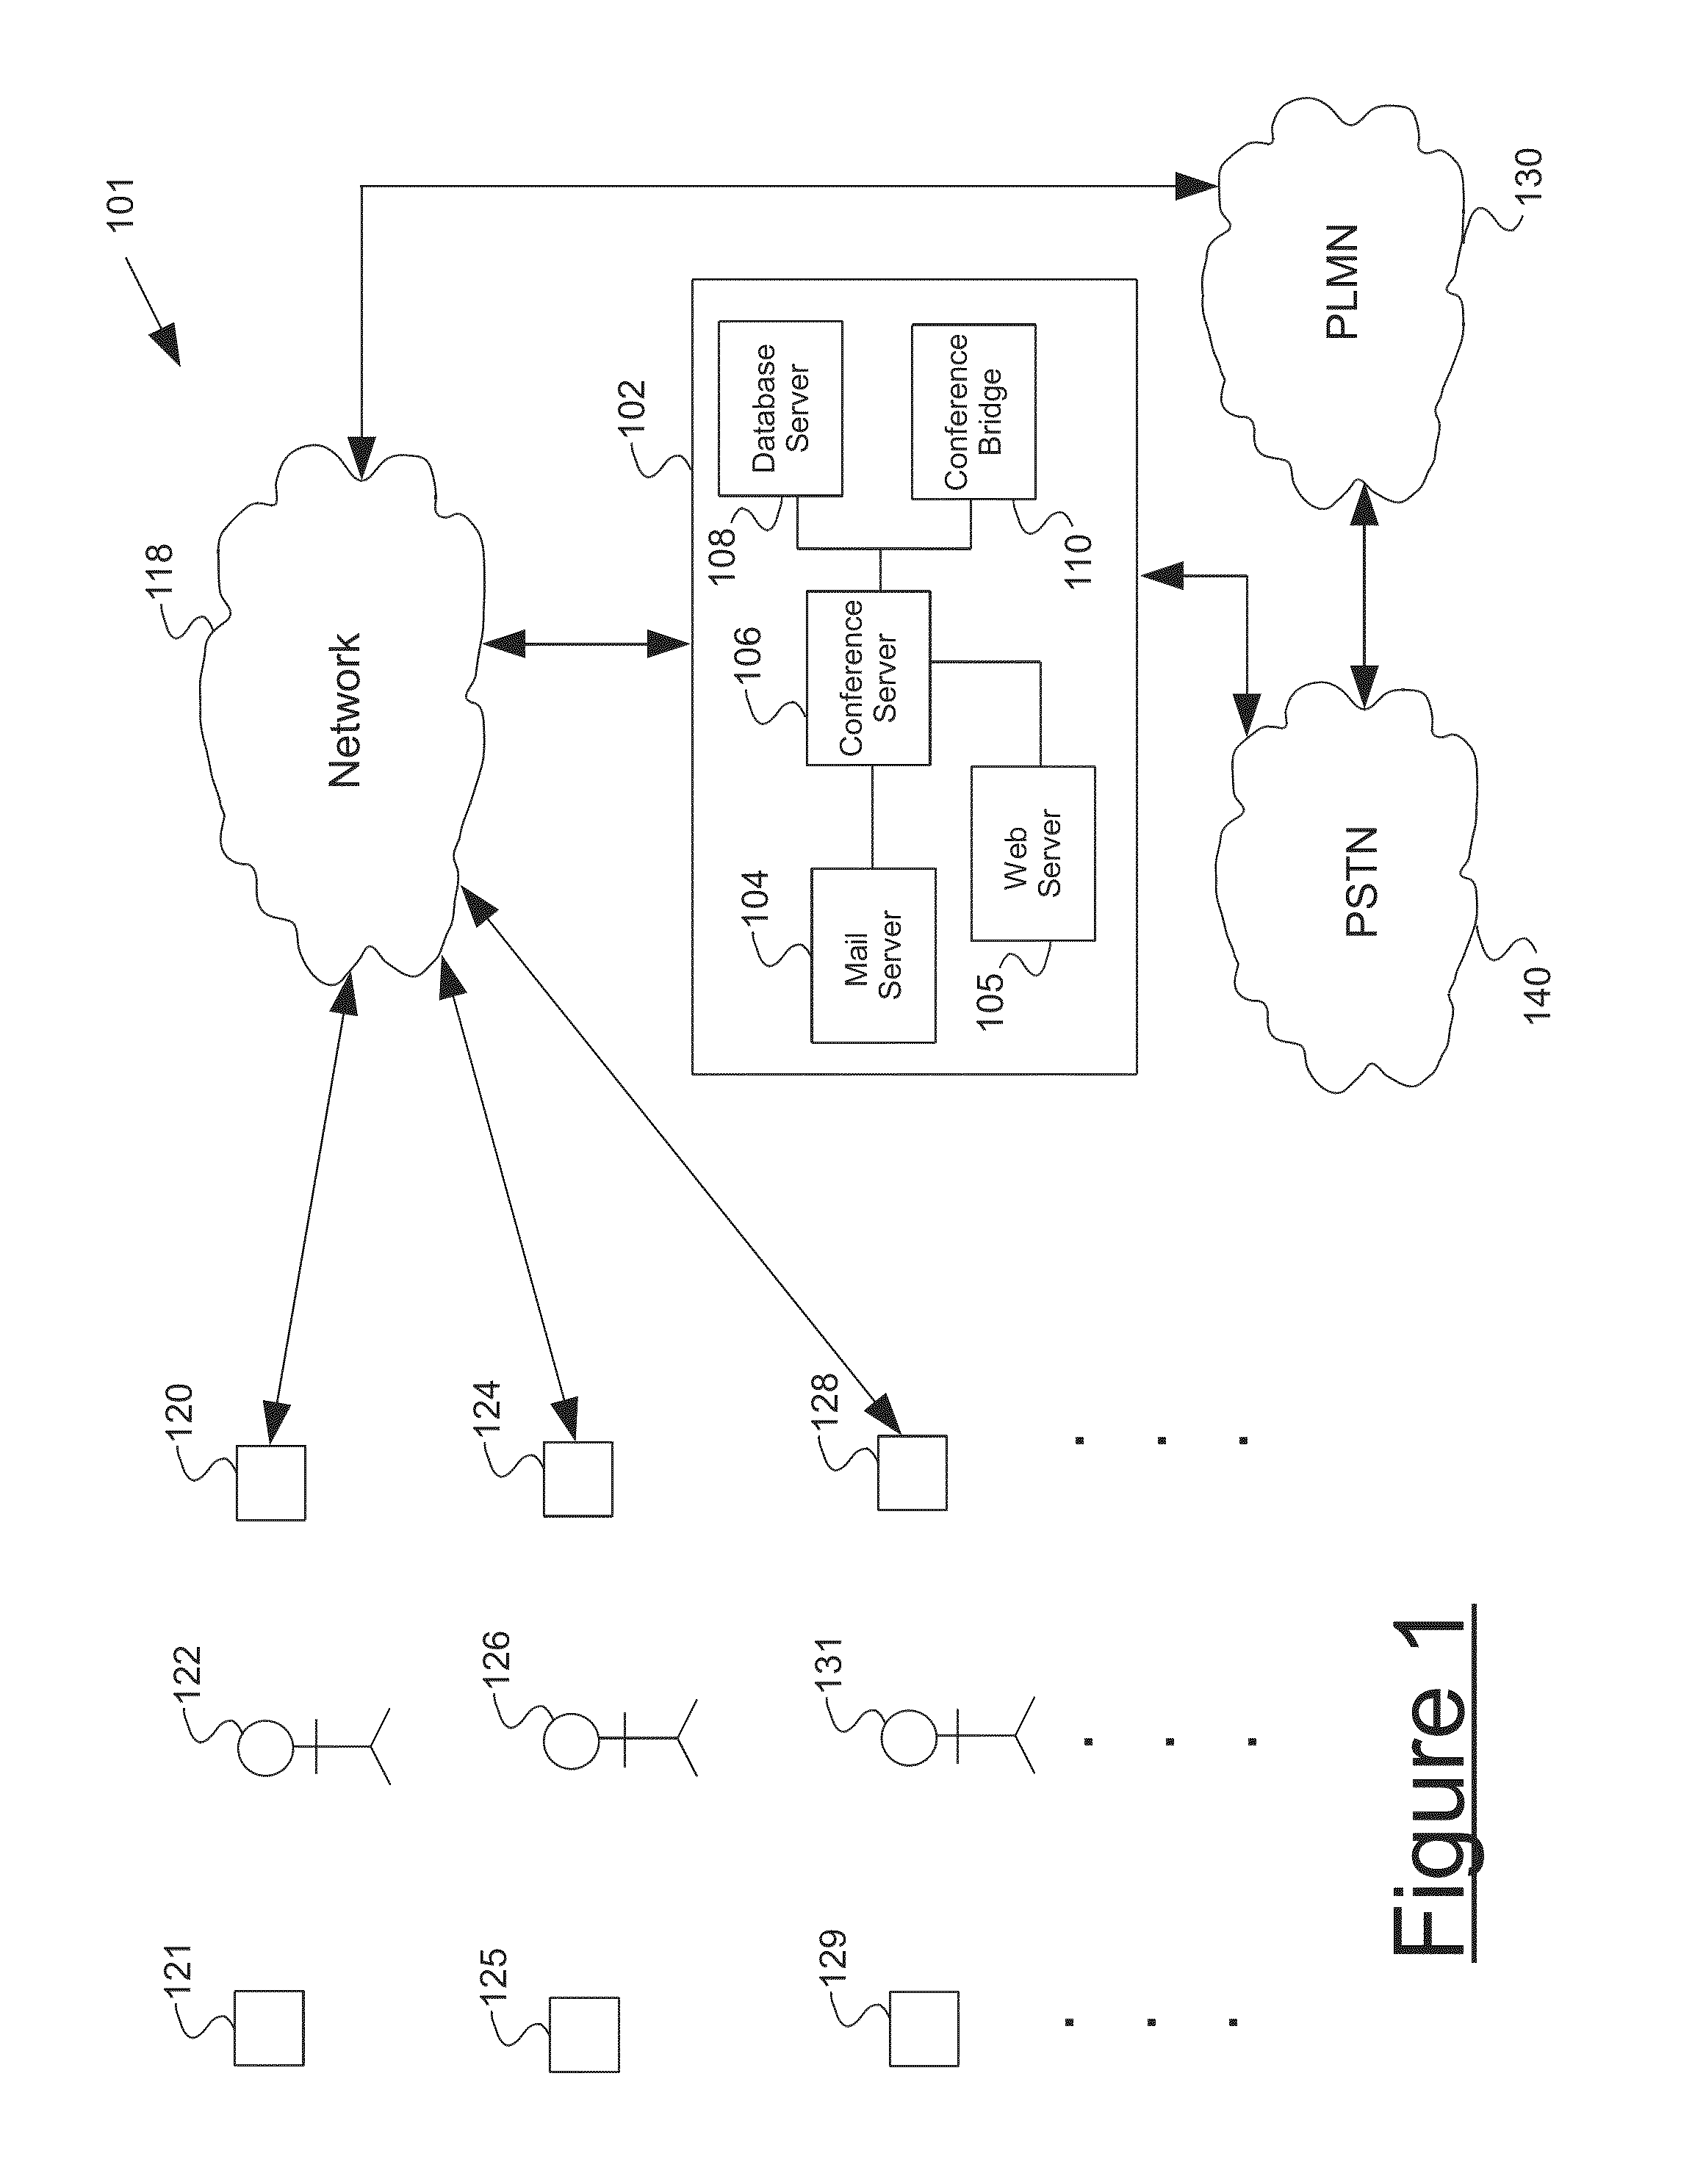 System and method of routing conference call participants